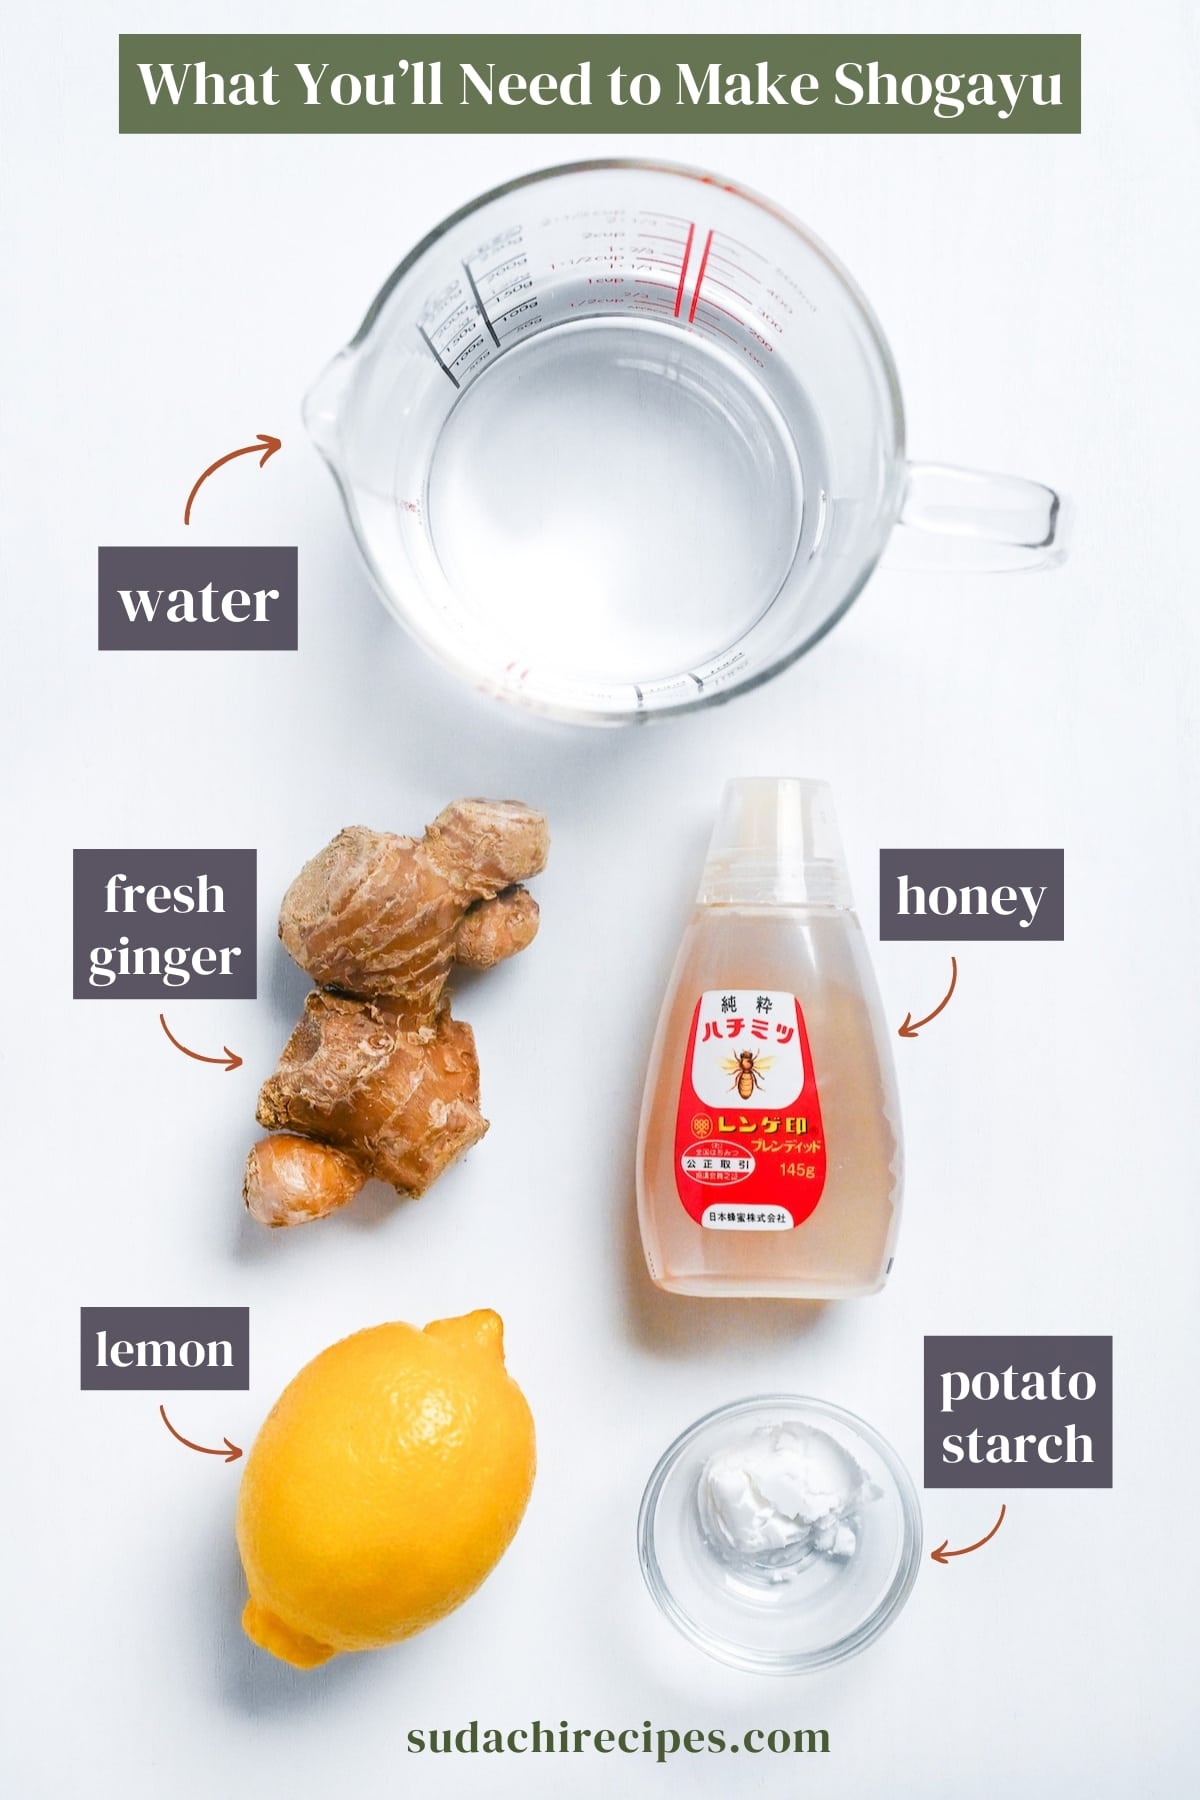 Ingredients used to make shogayu on a white background with labels